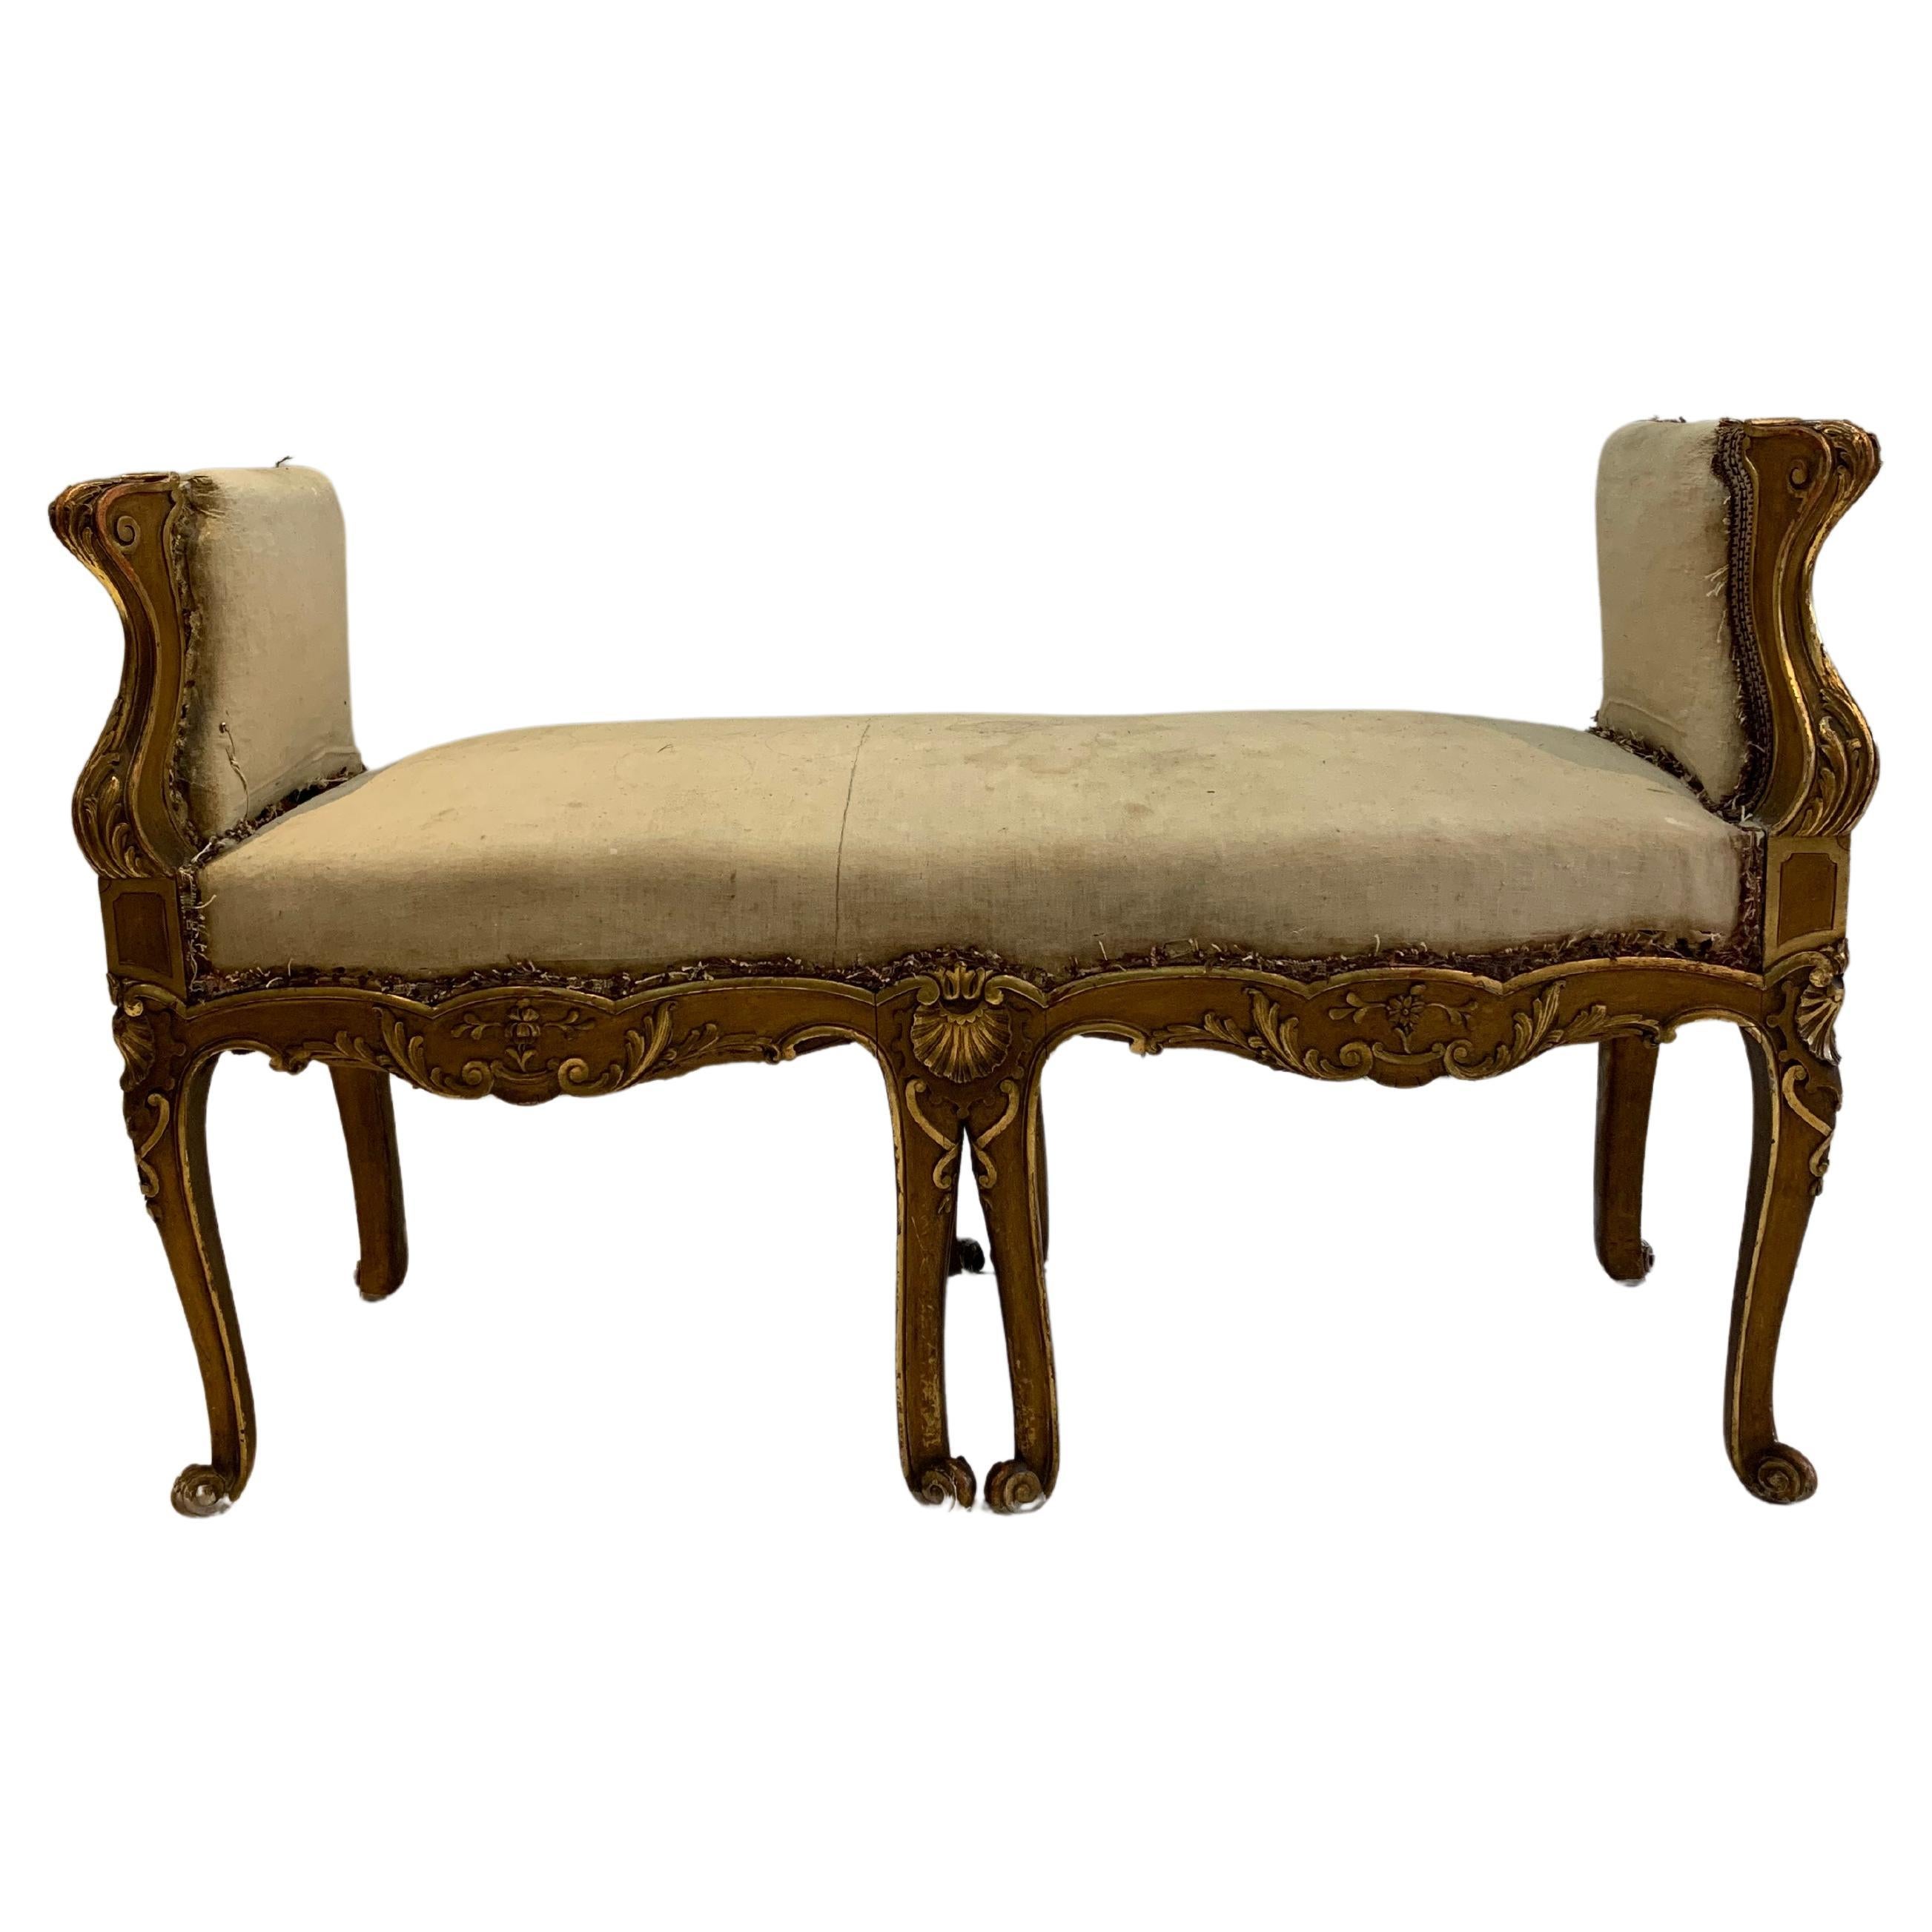 Late 18th Century Country House Giltwood Bench/Window Seat